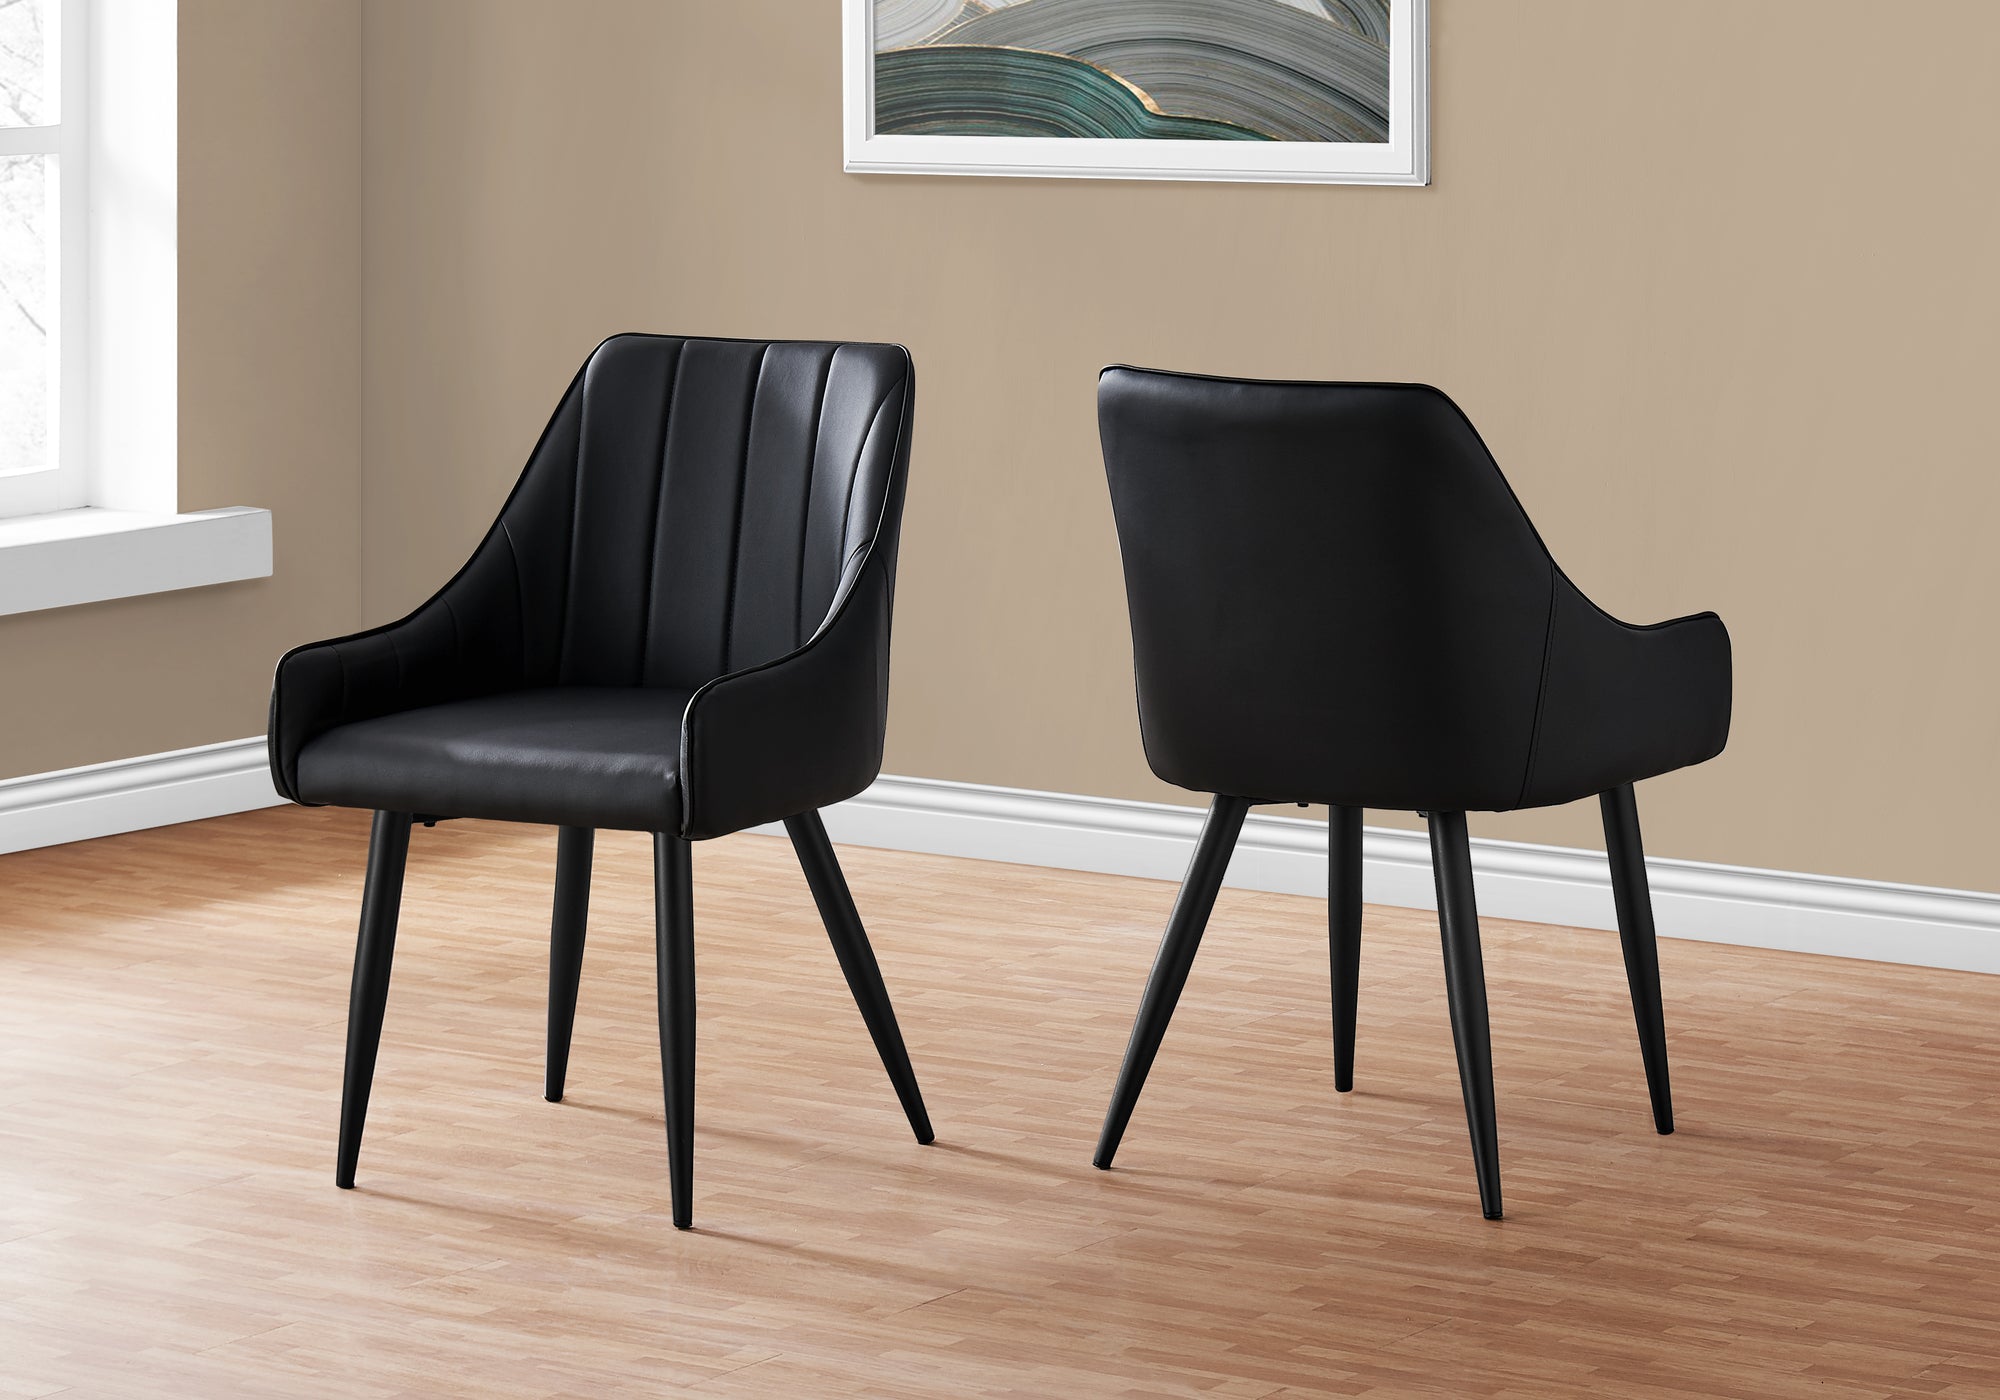 Mullan Luxury Low-Arm Dining Chair With Chrome Finished Legs (Set of 2 - Black)